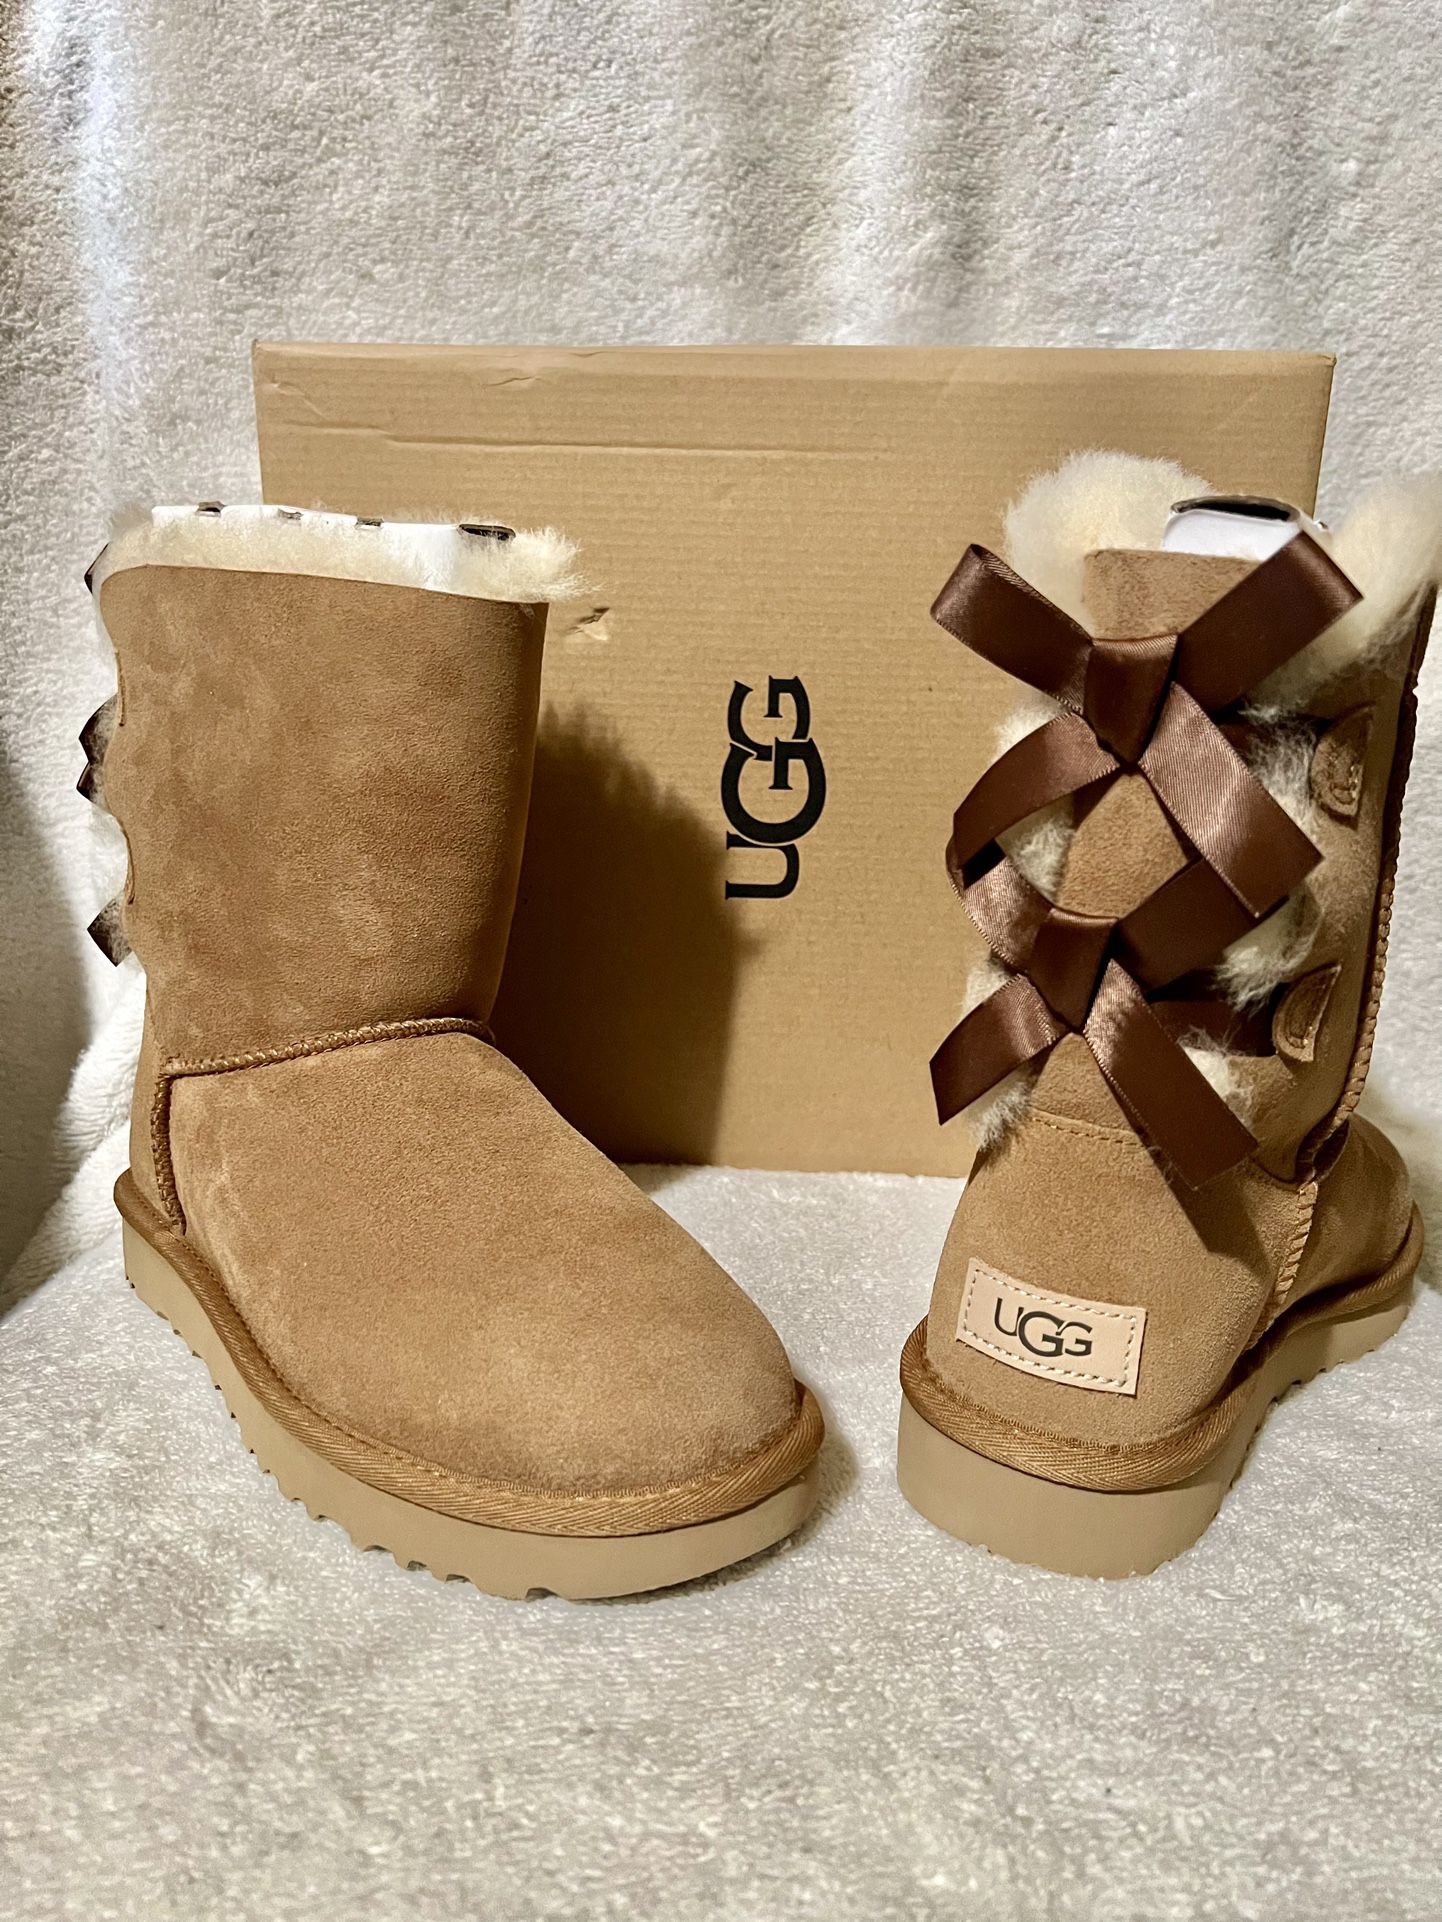 New!! Ugg  Woman’s Sizes 6  And 10 Chestnut Bailey Bow ll